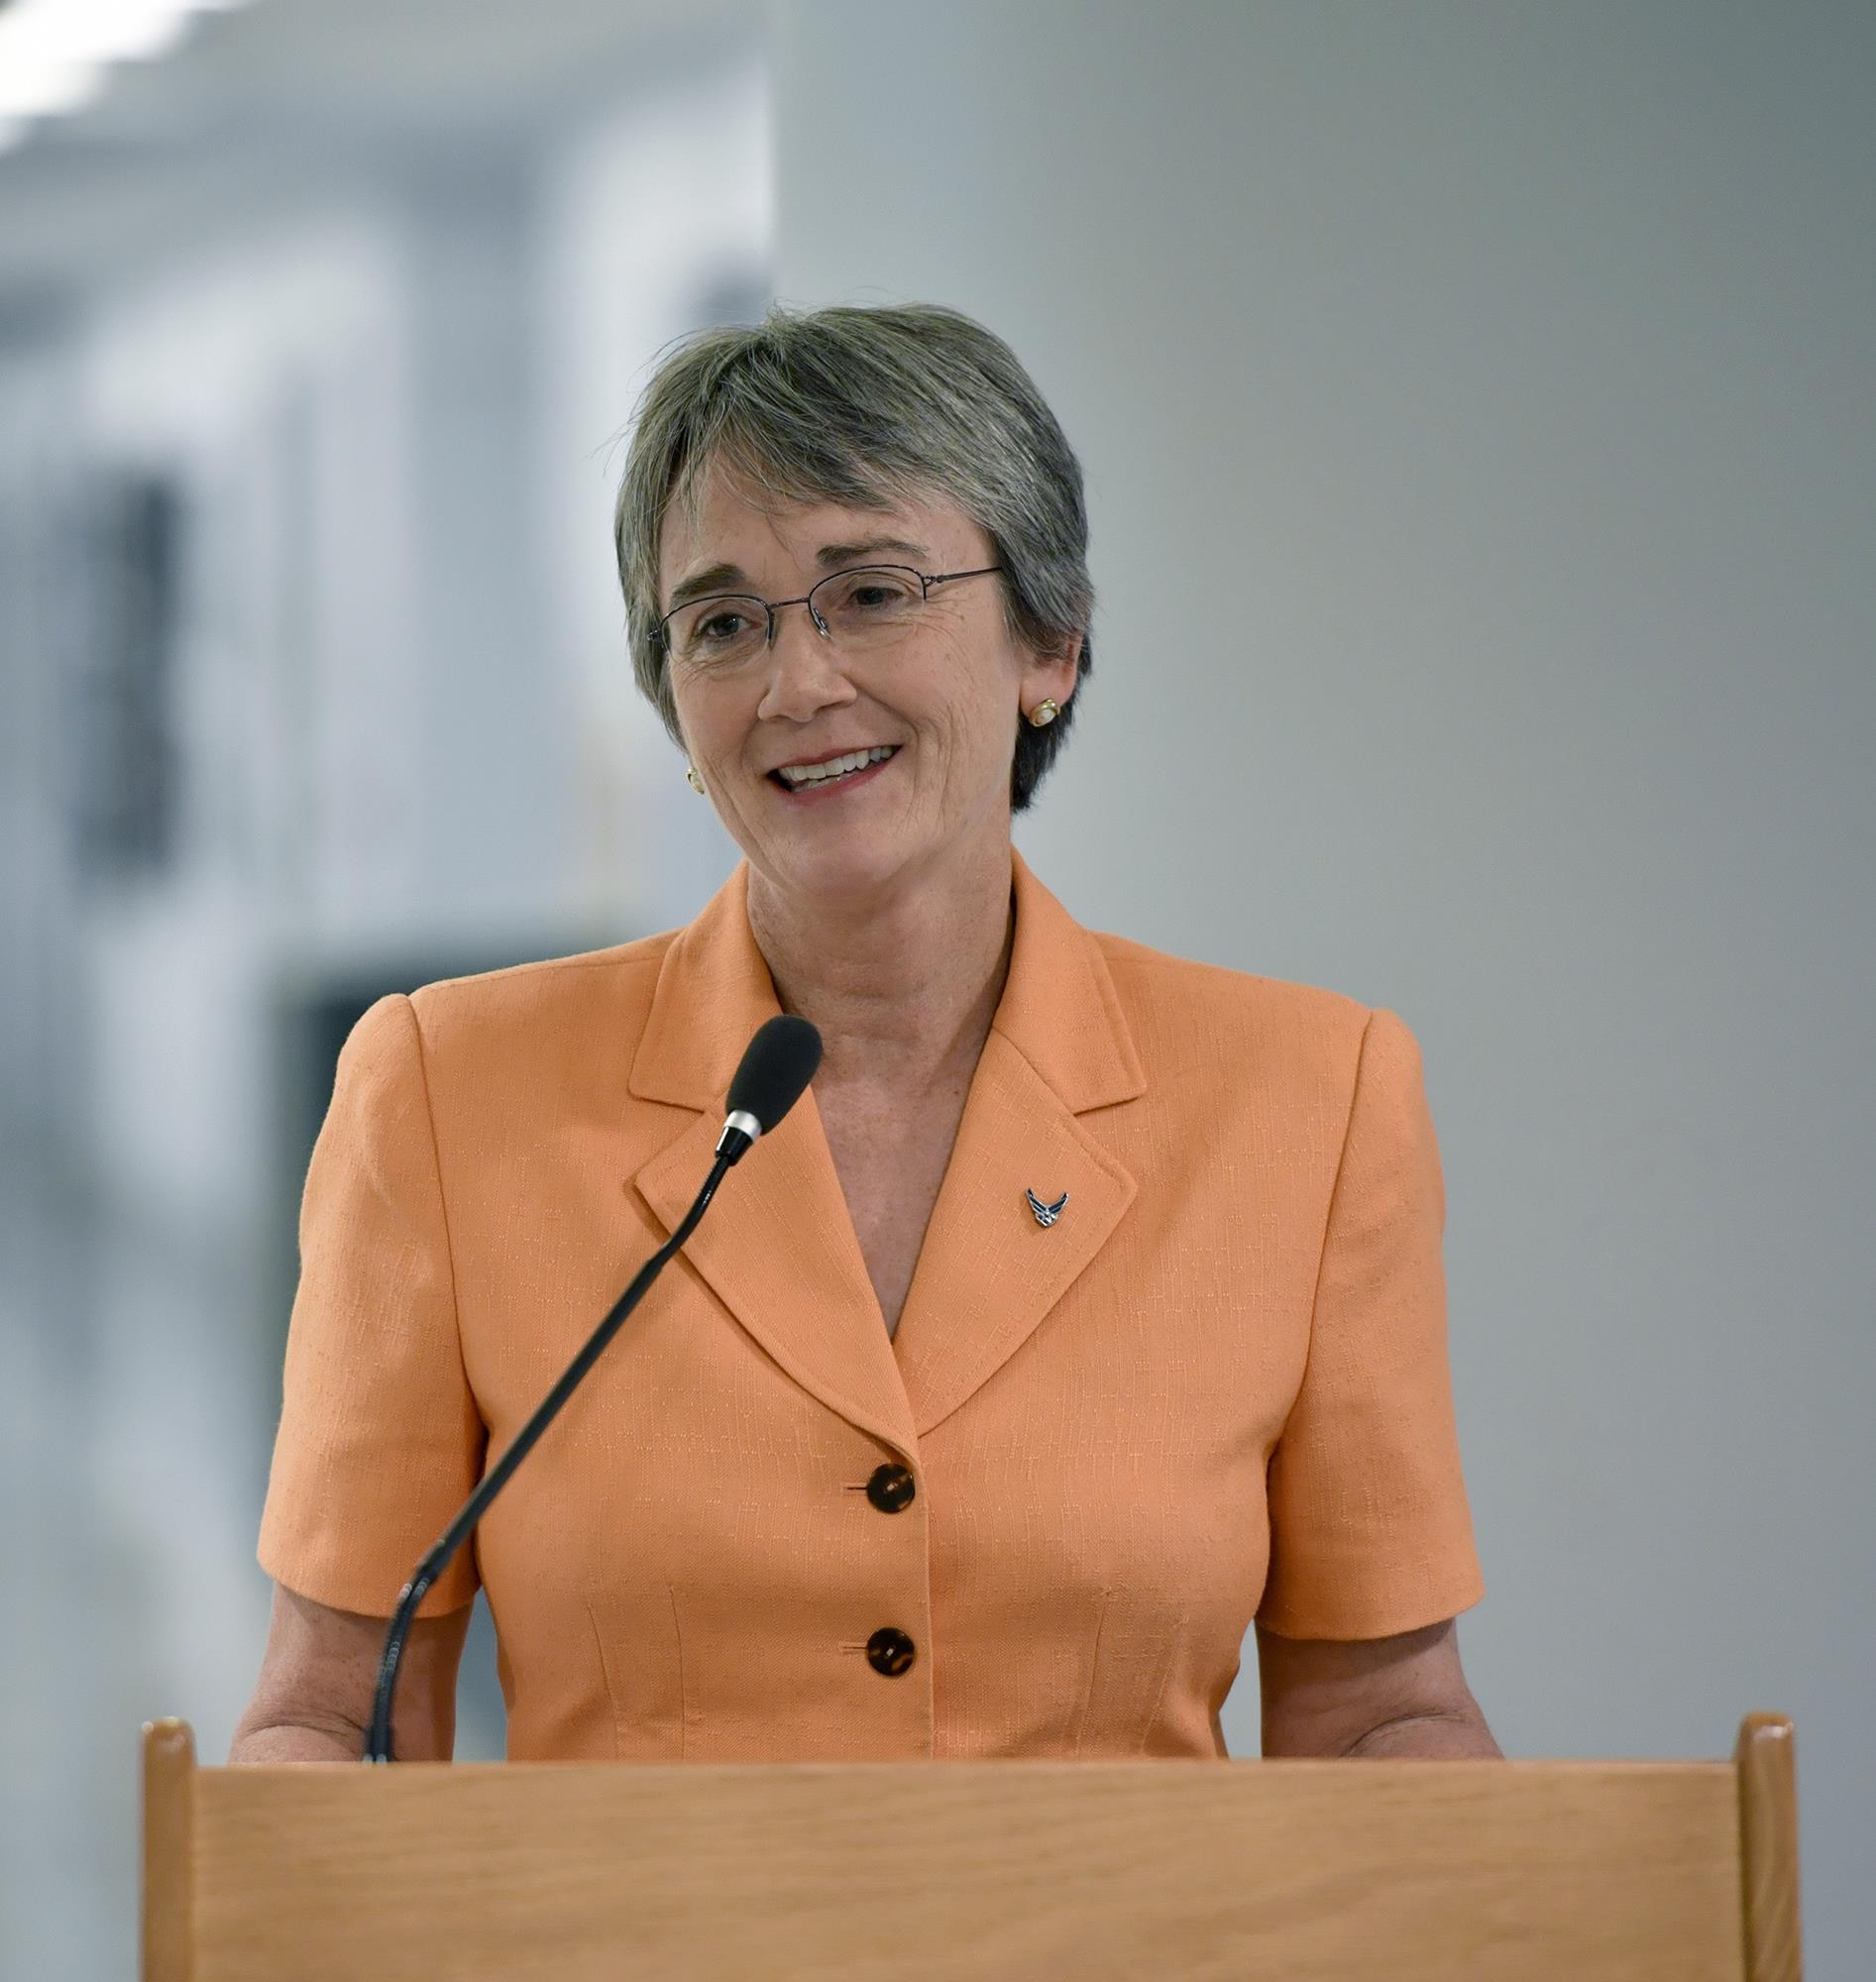 Secretary of the Air Force Heather Wilson speaks during the 2016 Presidential Rank Award ceremony held at the Pentagon, Washington D.C., July 14, 2017. The award is limited each year to only 1 percent of the Air Force’s senior executives and only 5 percent of Senior Executive Service employees may receive the Presidential Meritorious Rank Award. (U.S. Air Force photo/Wayne A. Clark)